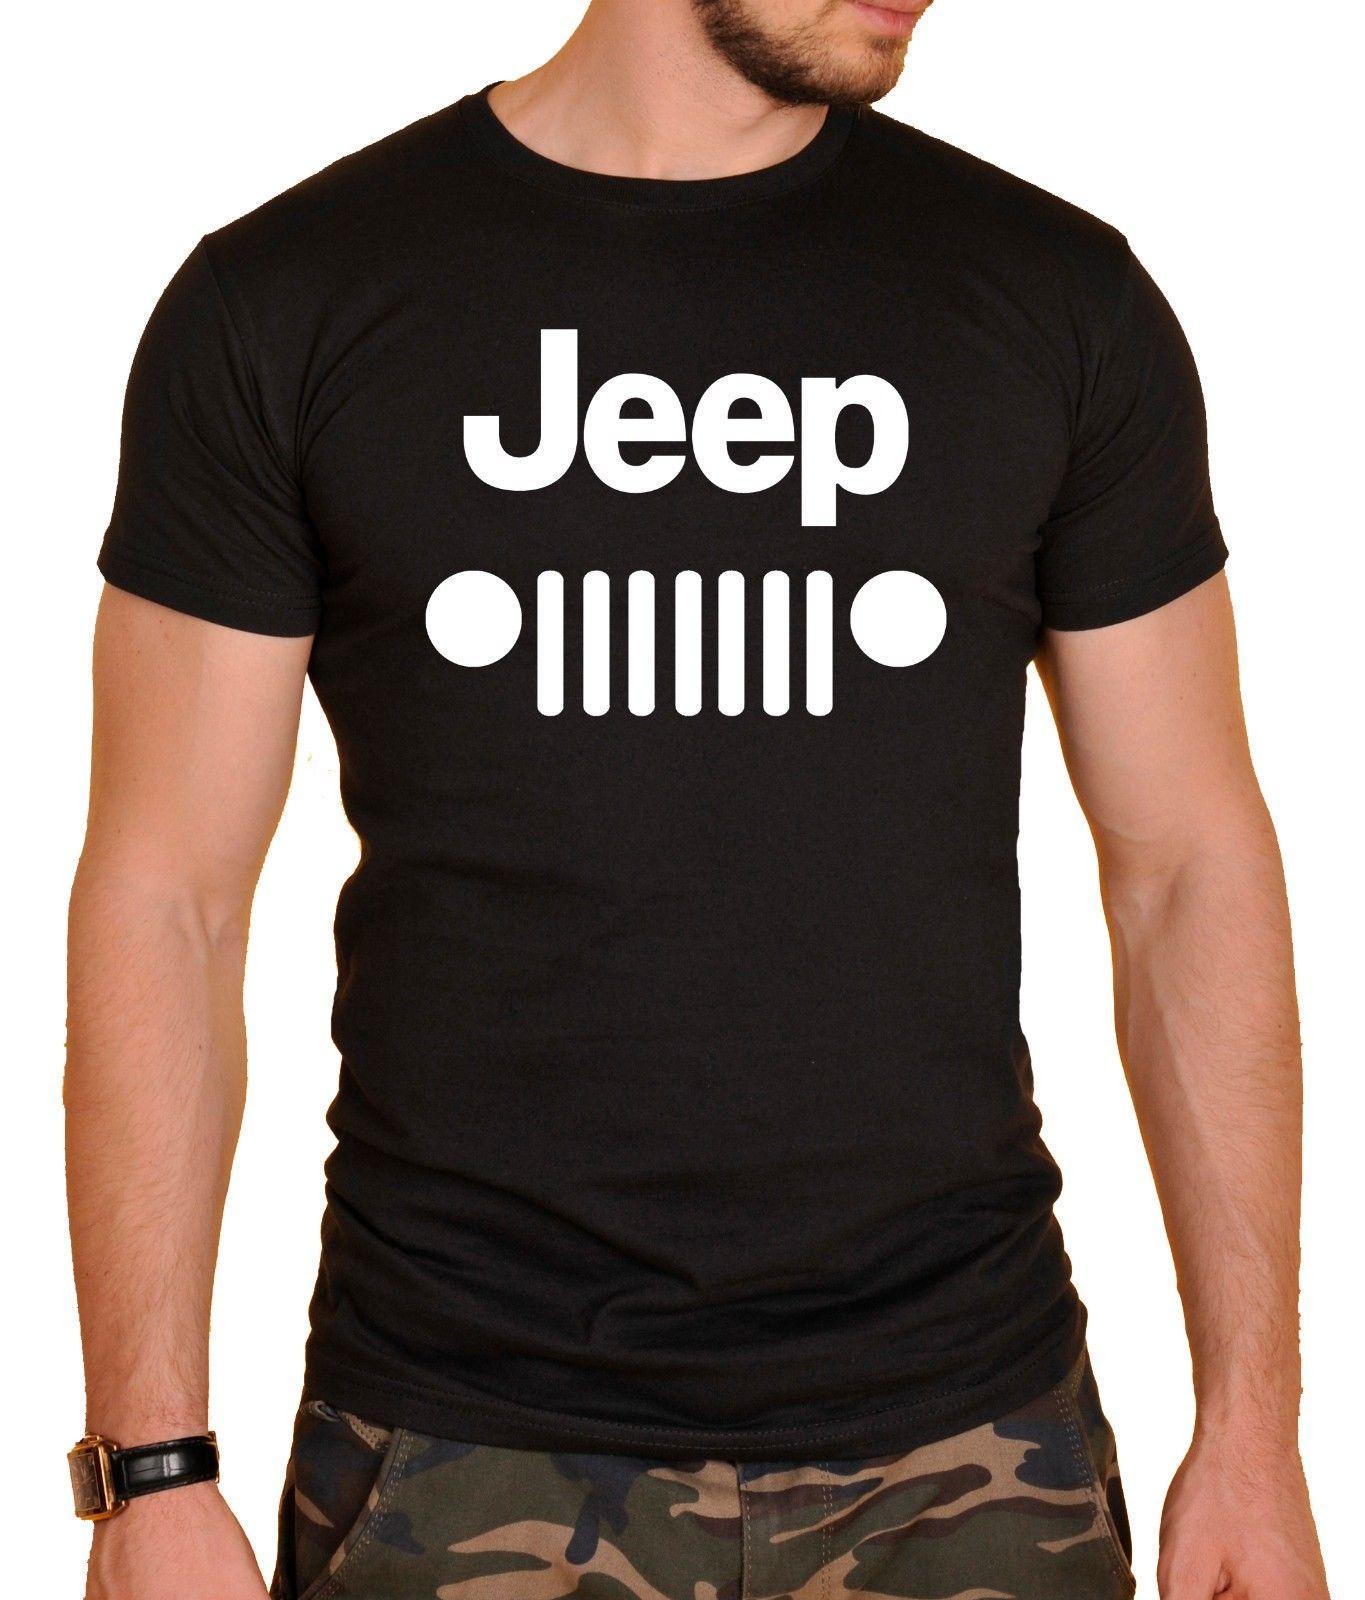 Funny Jeep Logo - Jeep Logo Cars T Shirt Black New Humor Tees Funny Tee From Jie035 ...